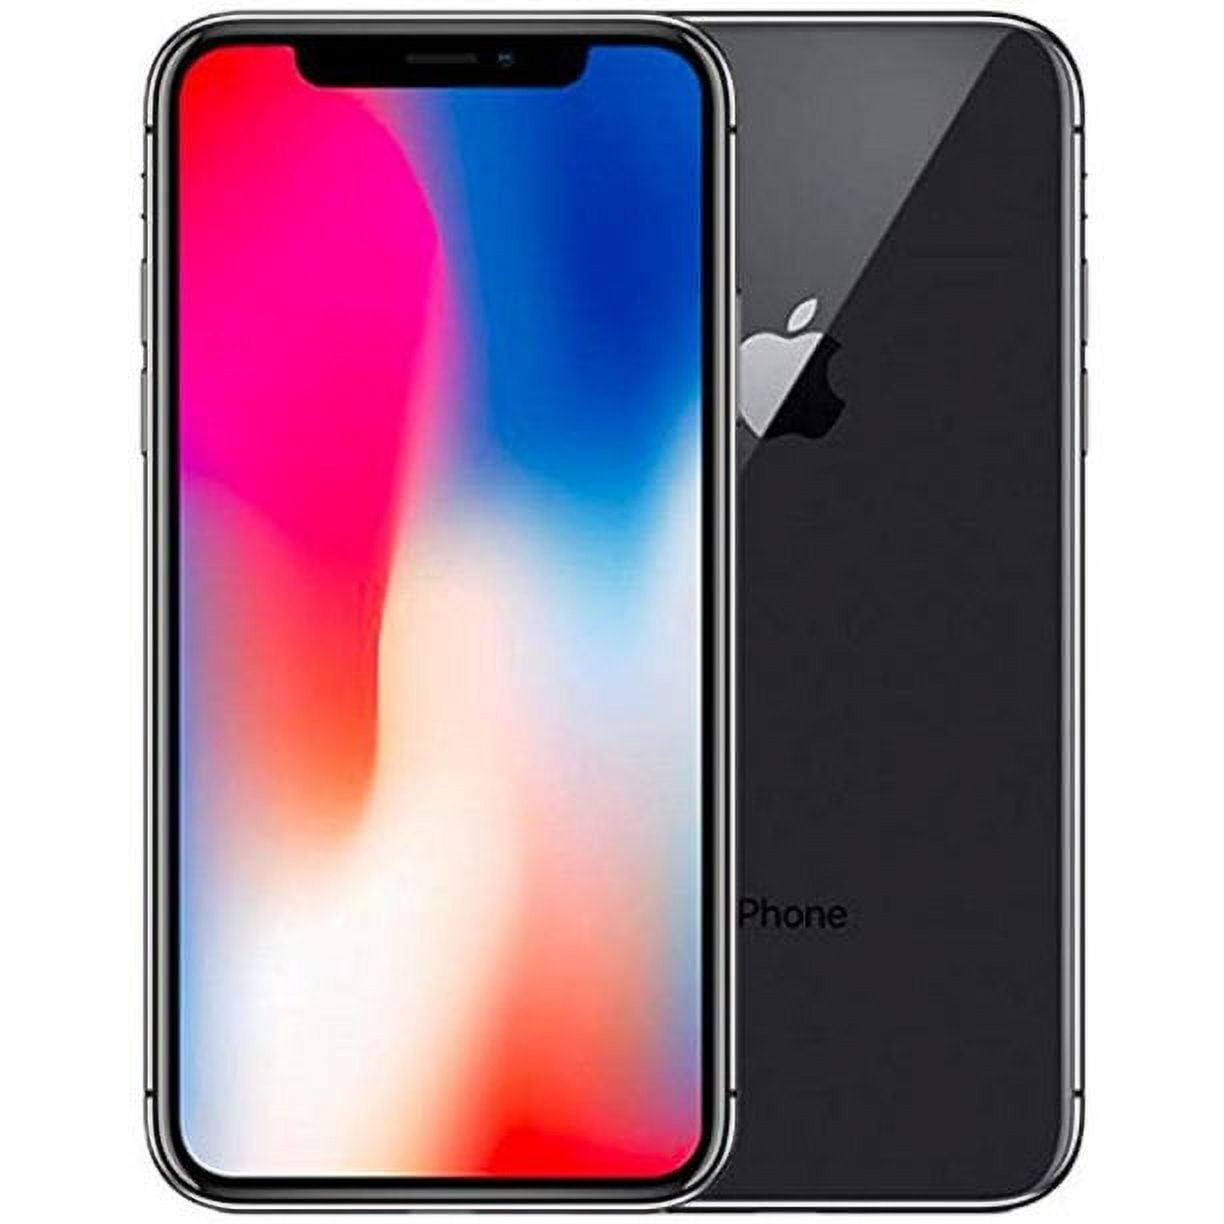 Restored Apple iPhone X, 64GB, Space Gray - For AT&T / T-Mobile